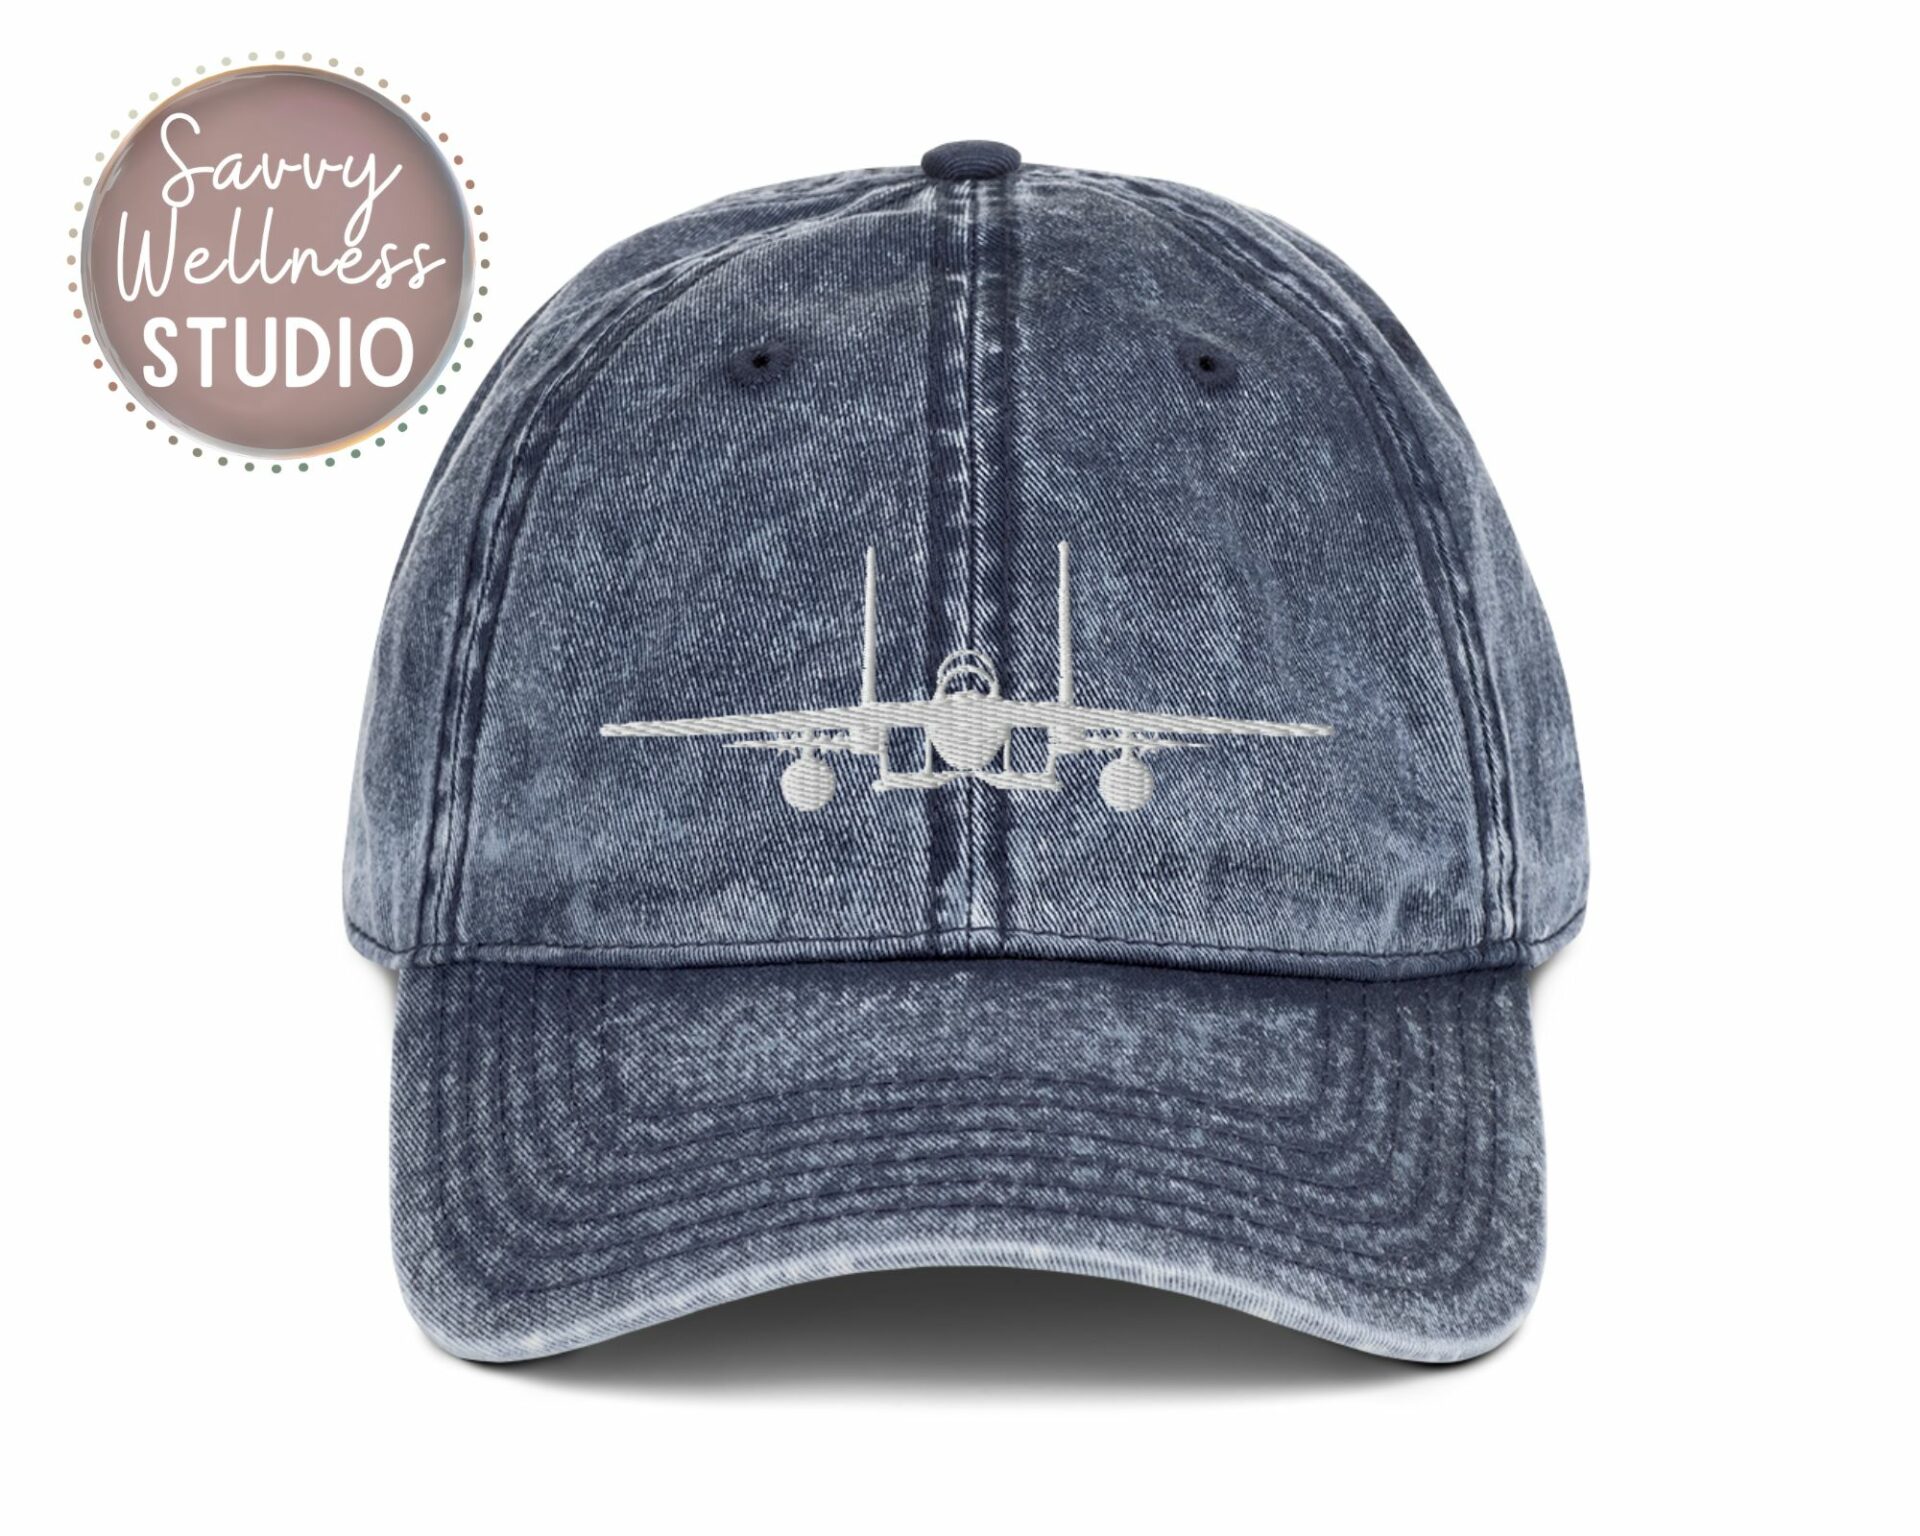 F-15 front view in white embroidery on navy baseball cap